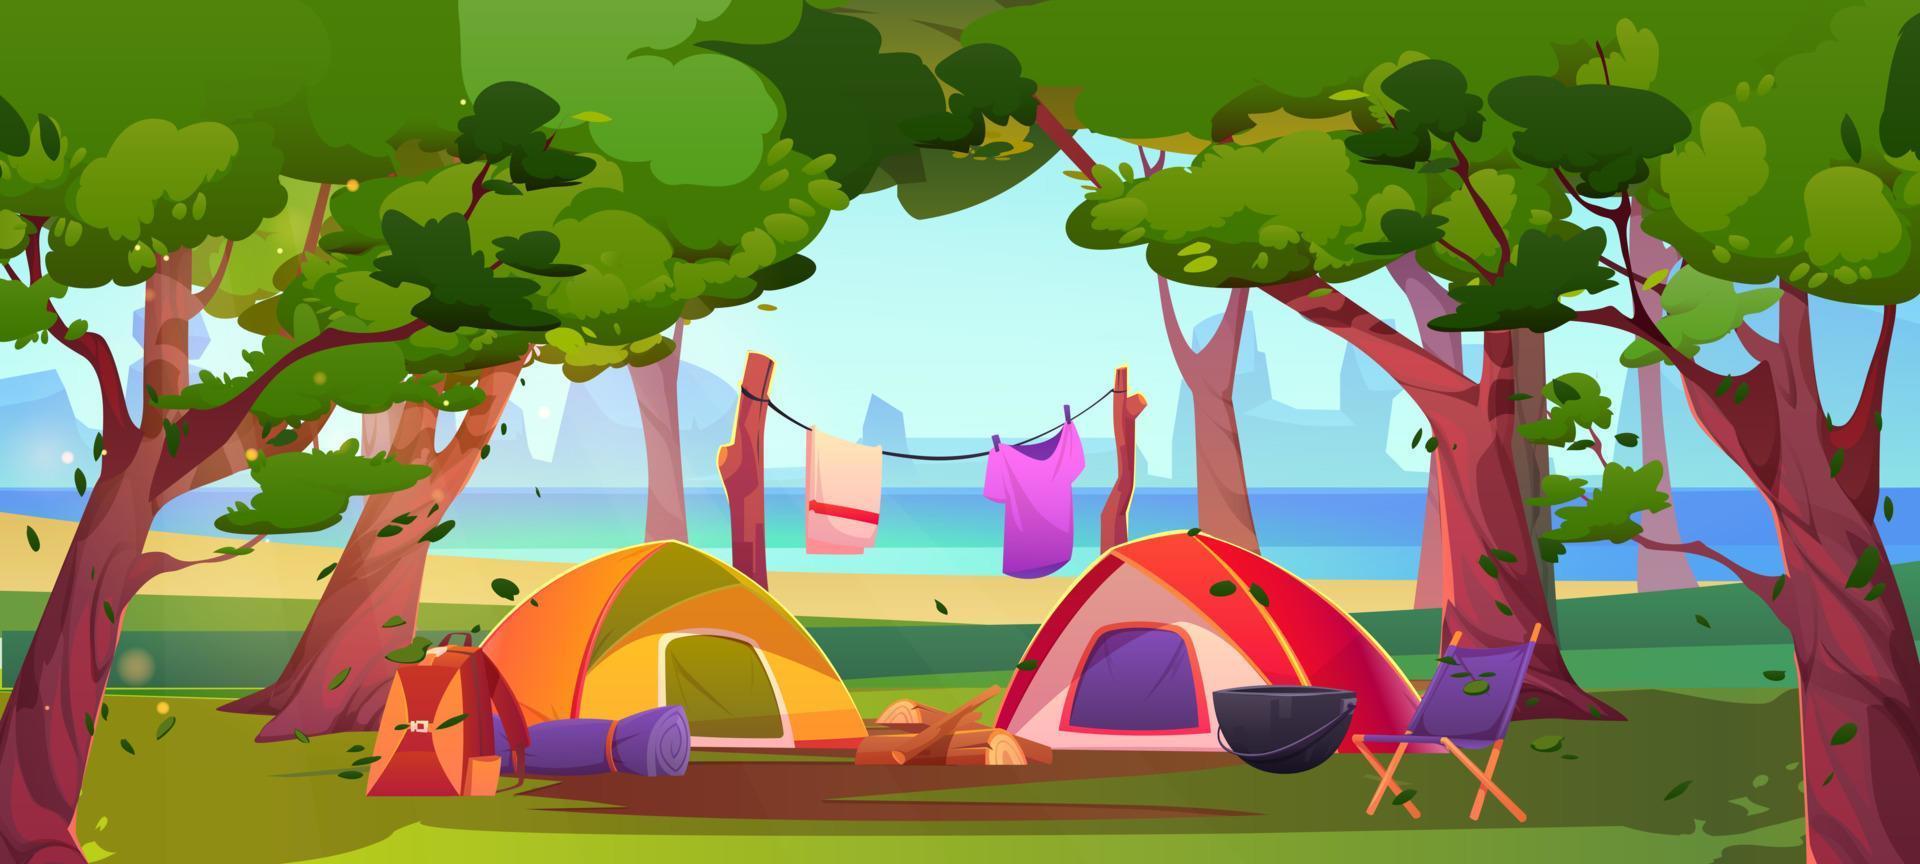 Summer camp in forest with tents and campfire vector